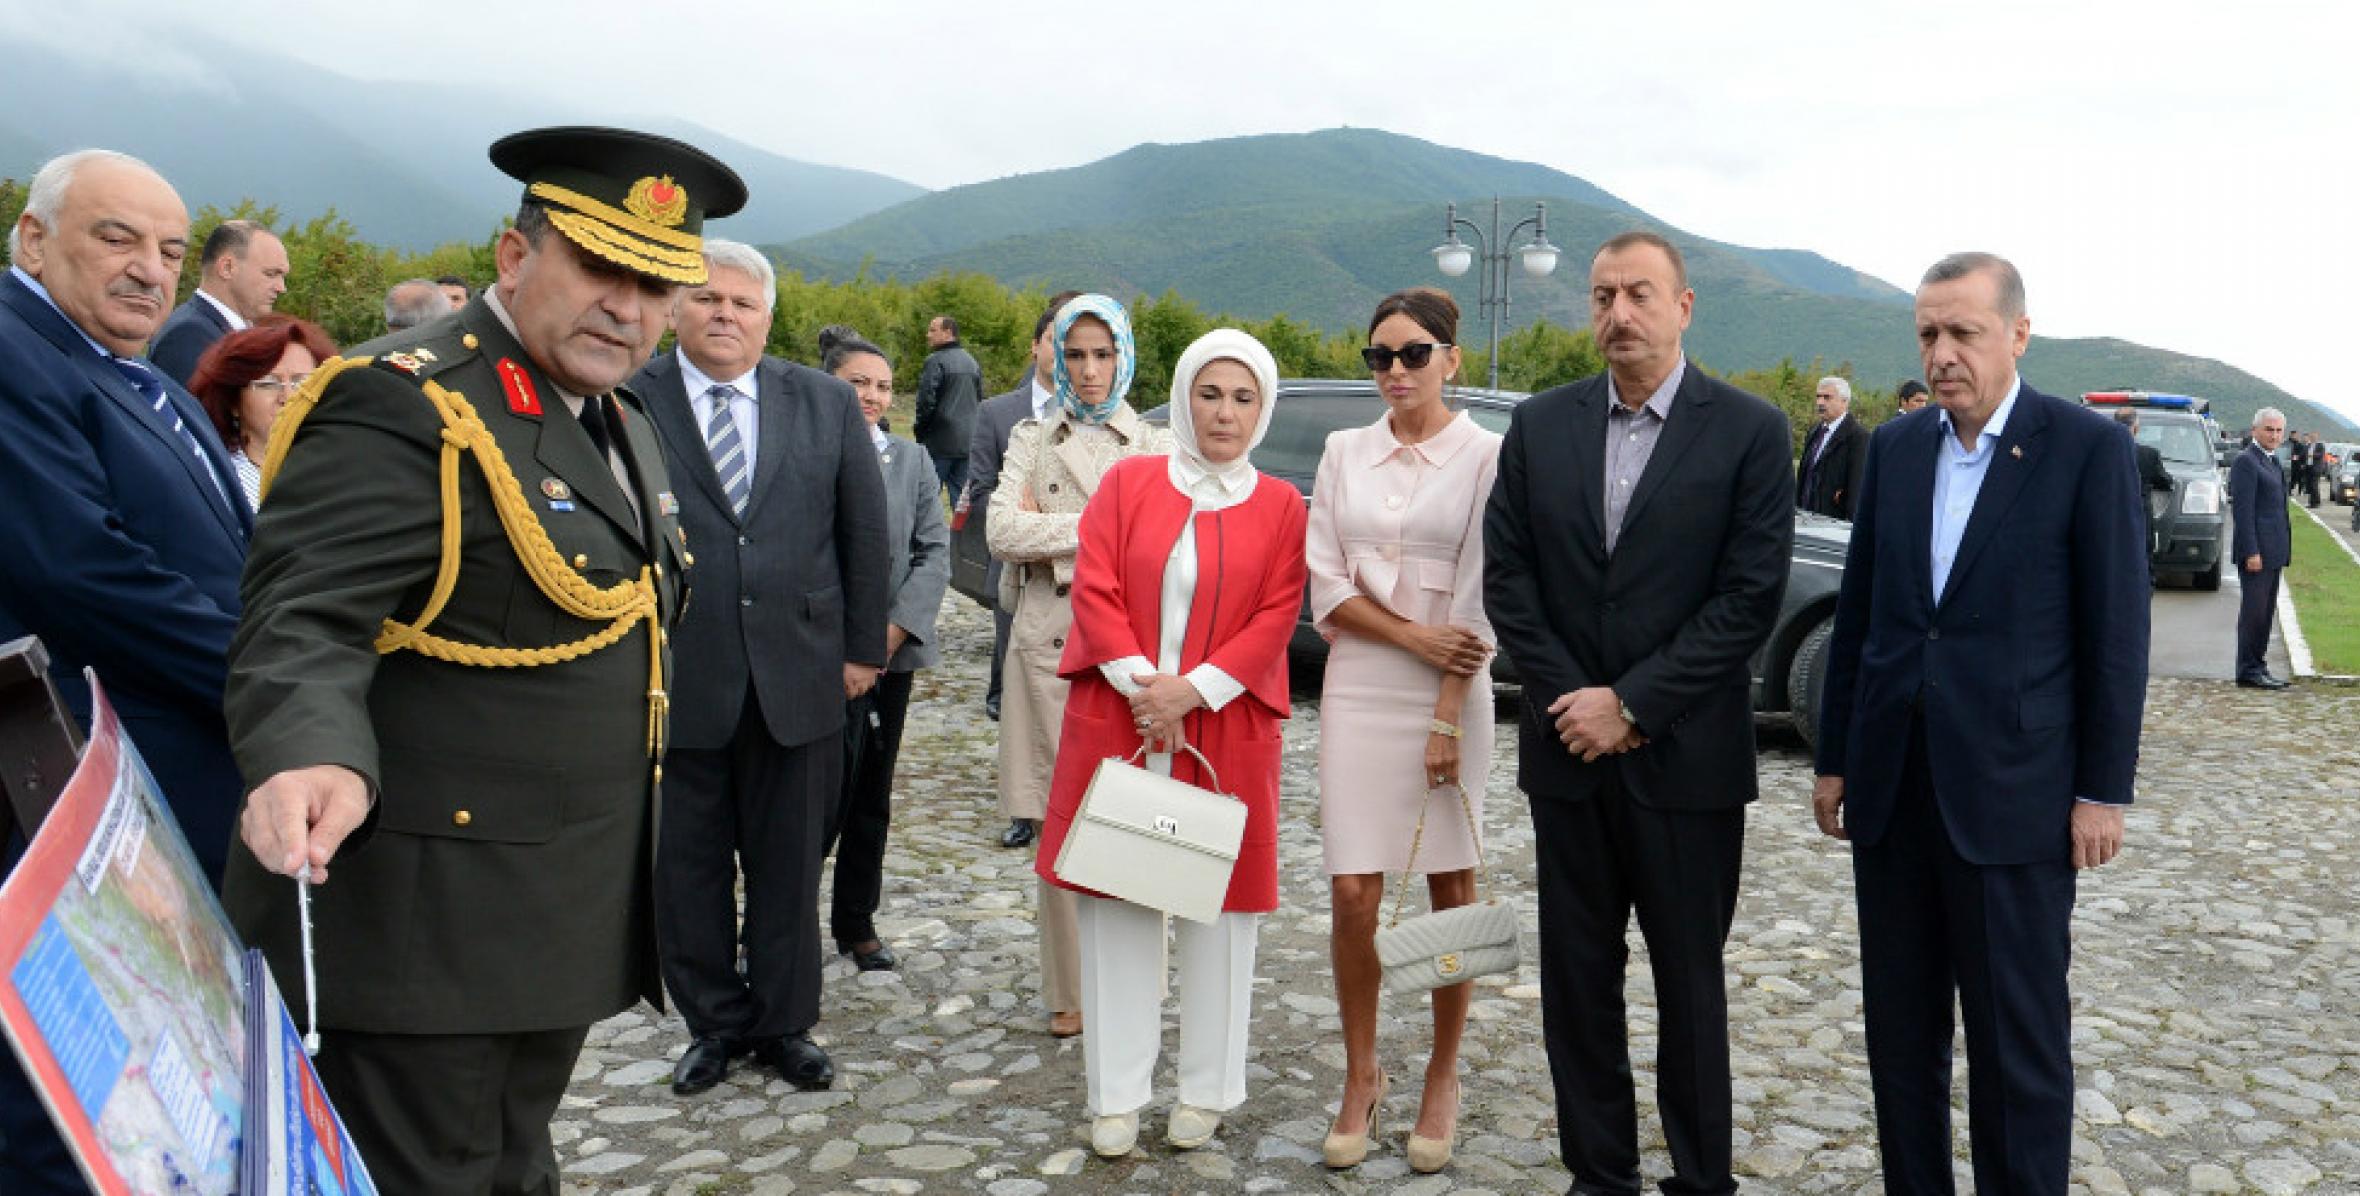 Ilham Aliyev and Prime Minister Recep Tayyip Erdogan visited the Turkish soldiers memorial in Shaki